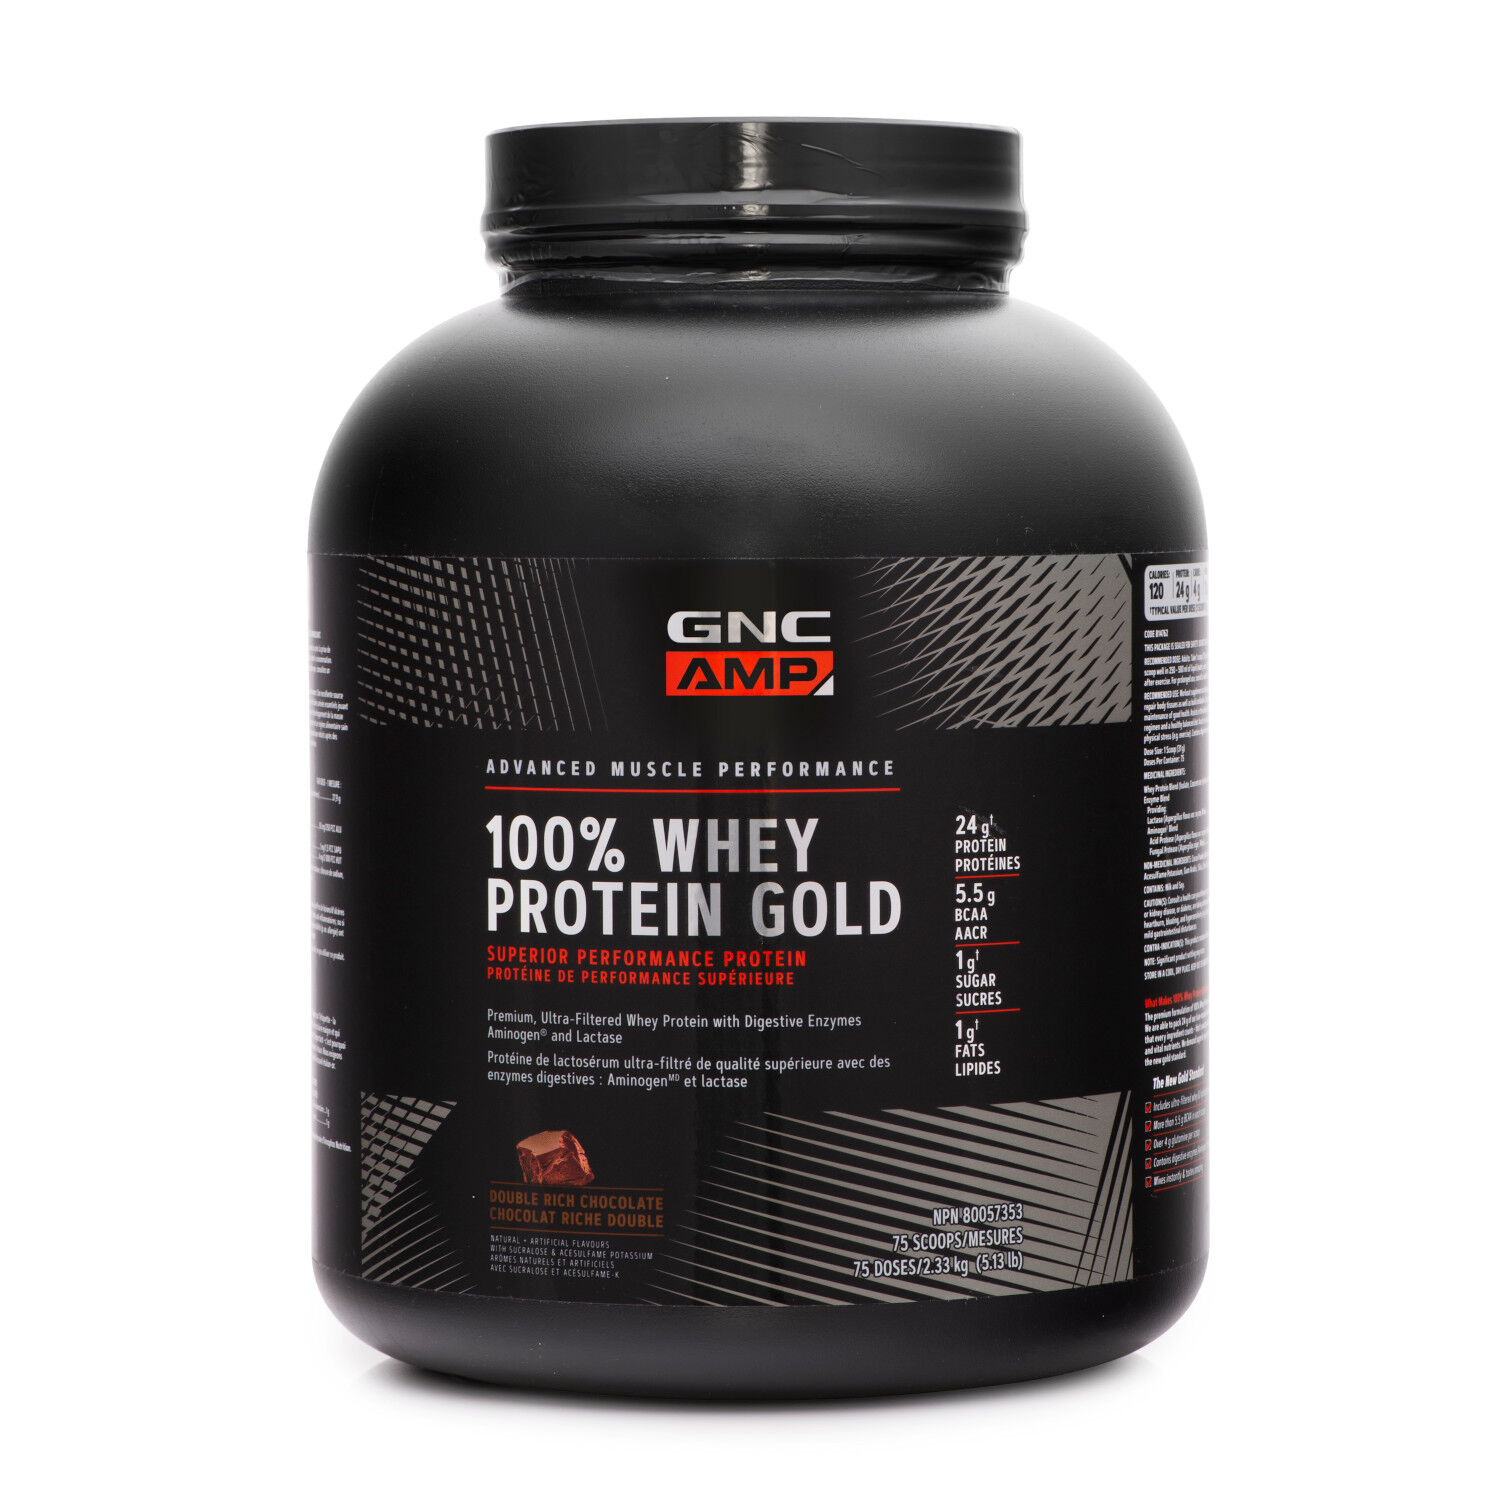 GNC AMP 100% Whey Protein Gold - Double Rich Chocolate